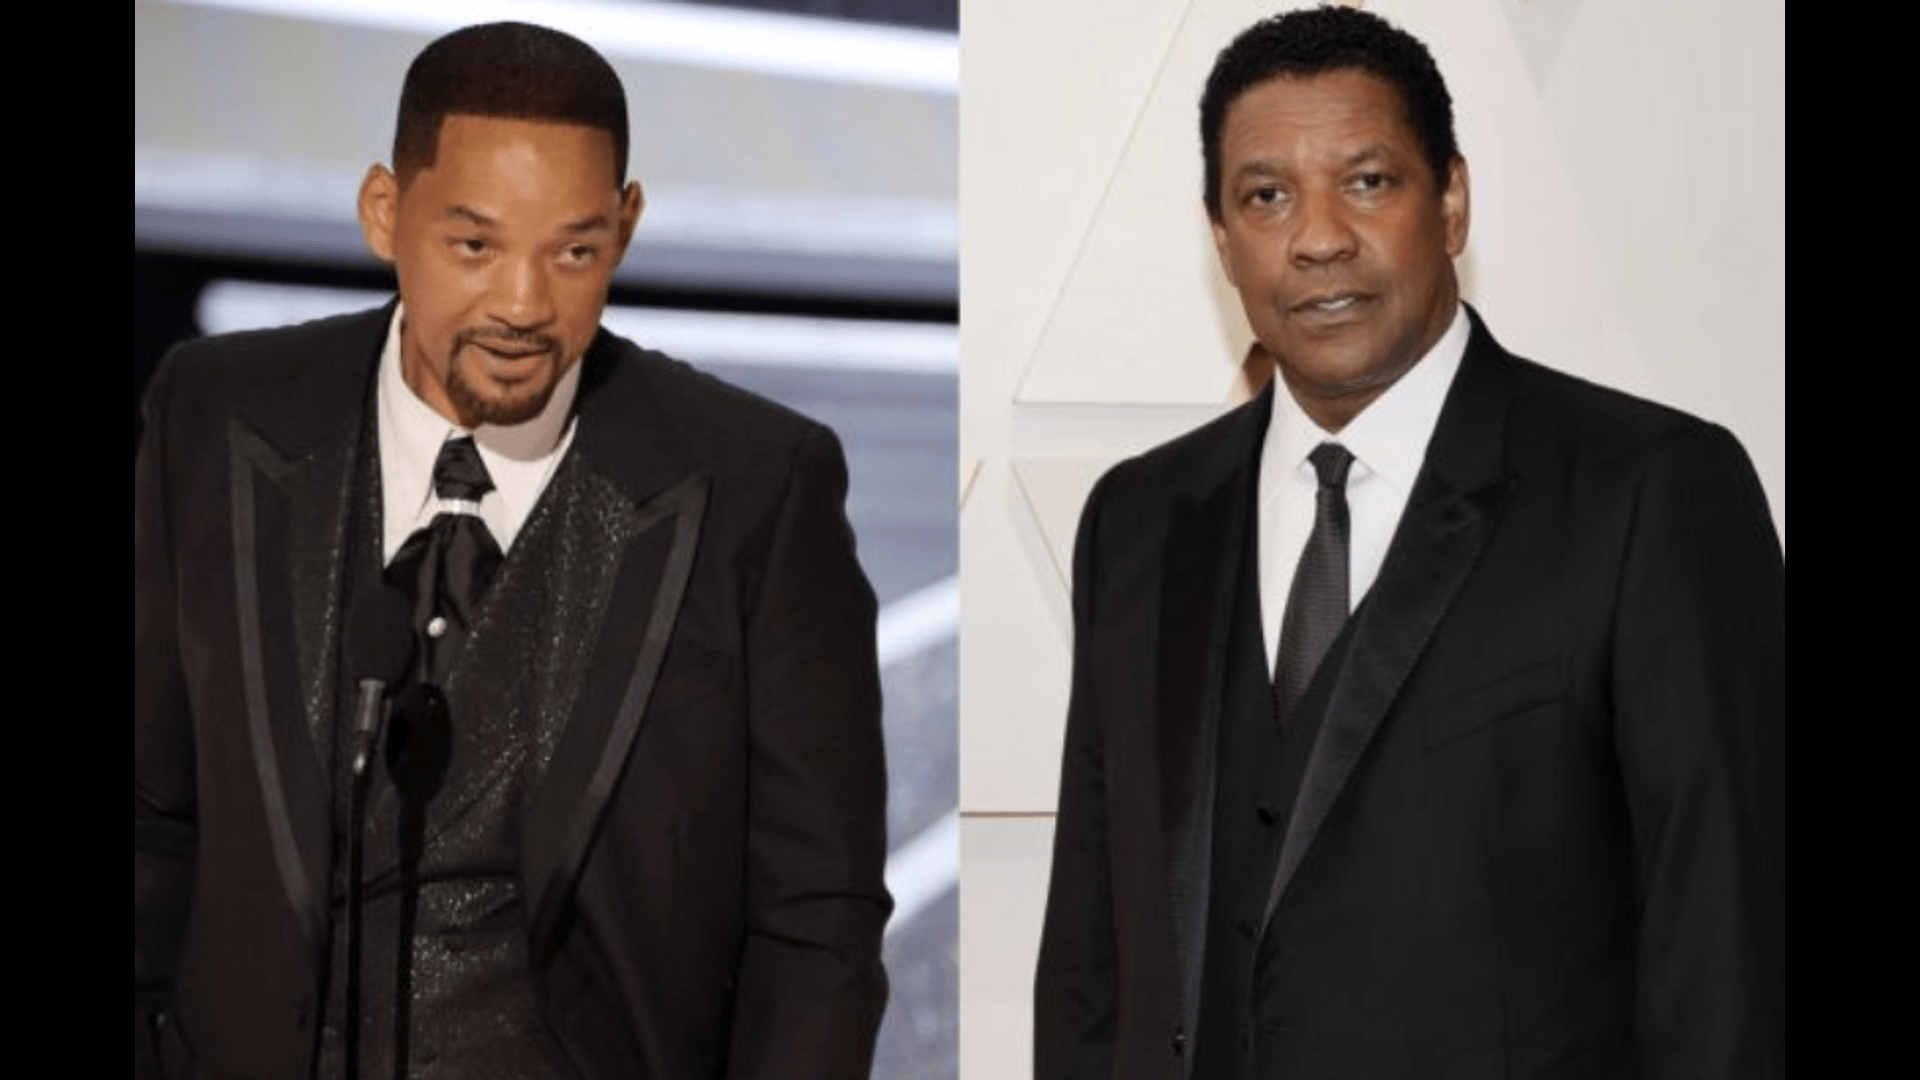 ”denzel-washington-defends-will-smith-it-could-have-happened-to-anyone”